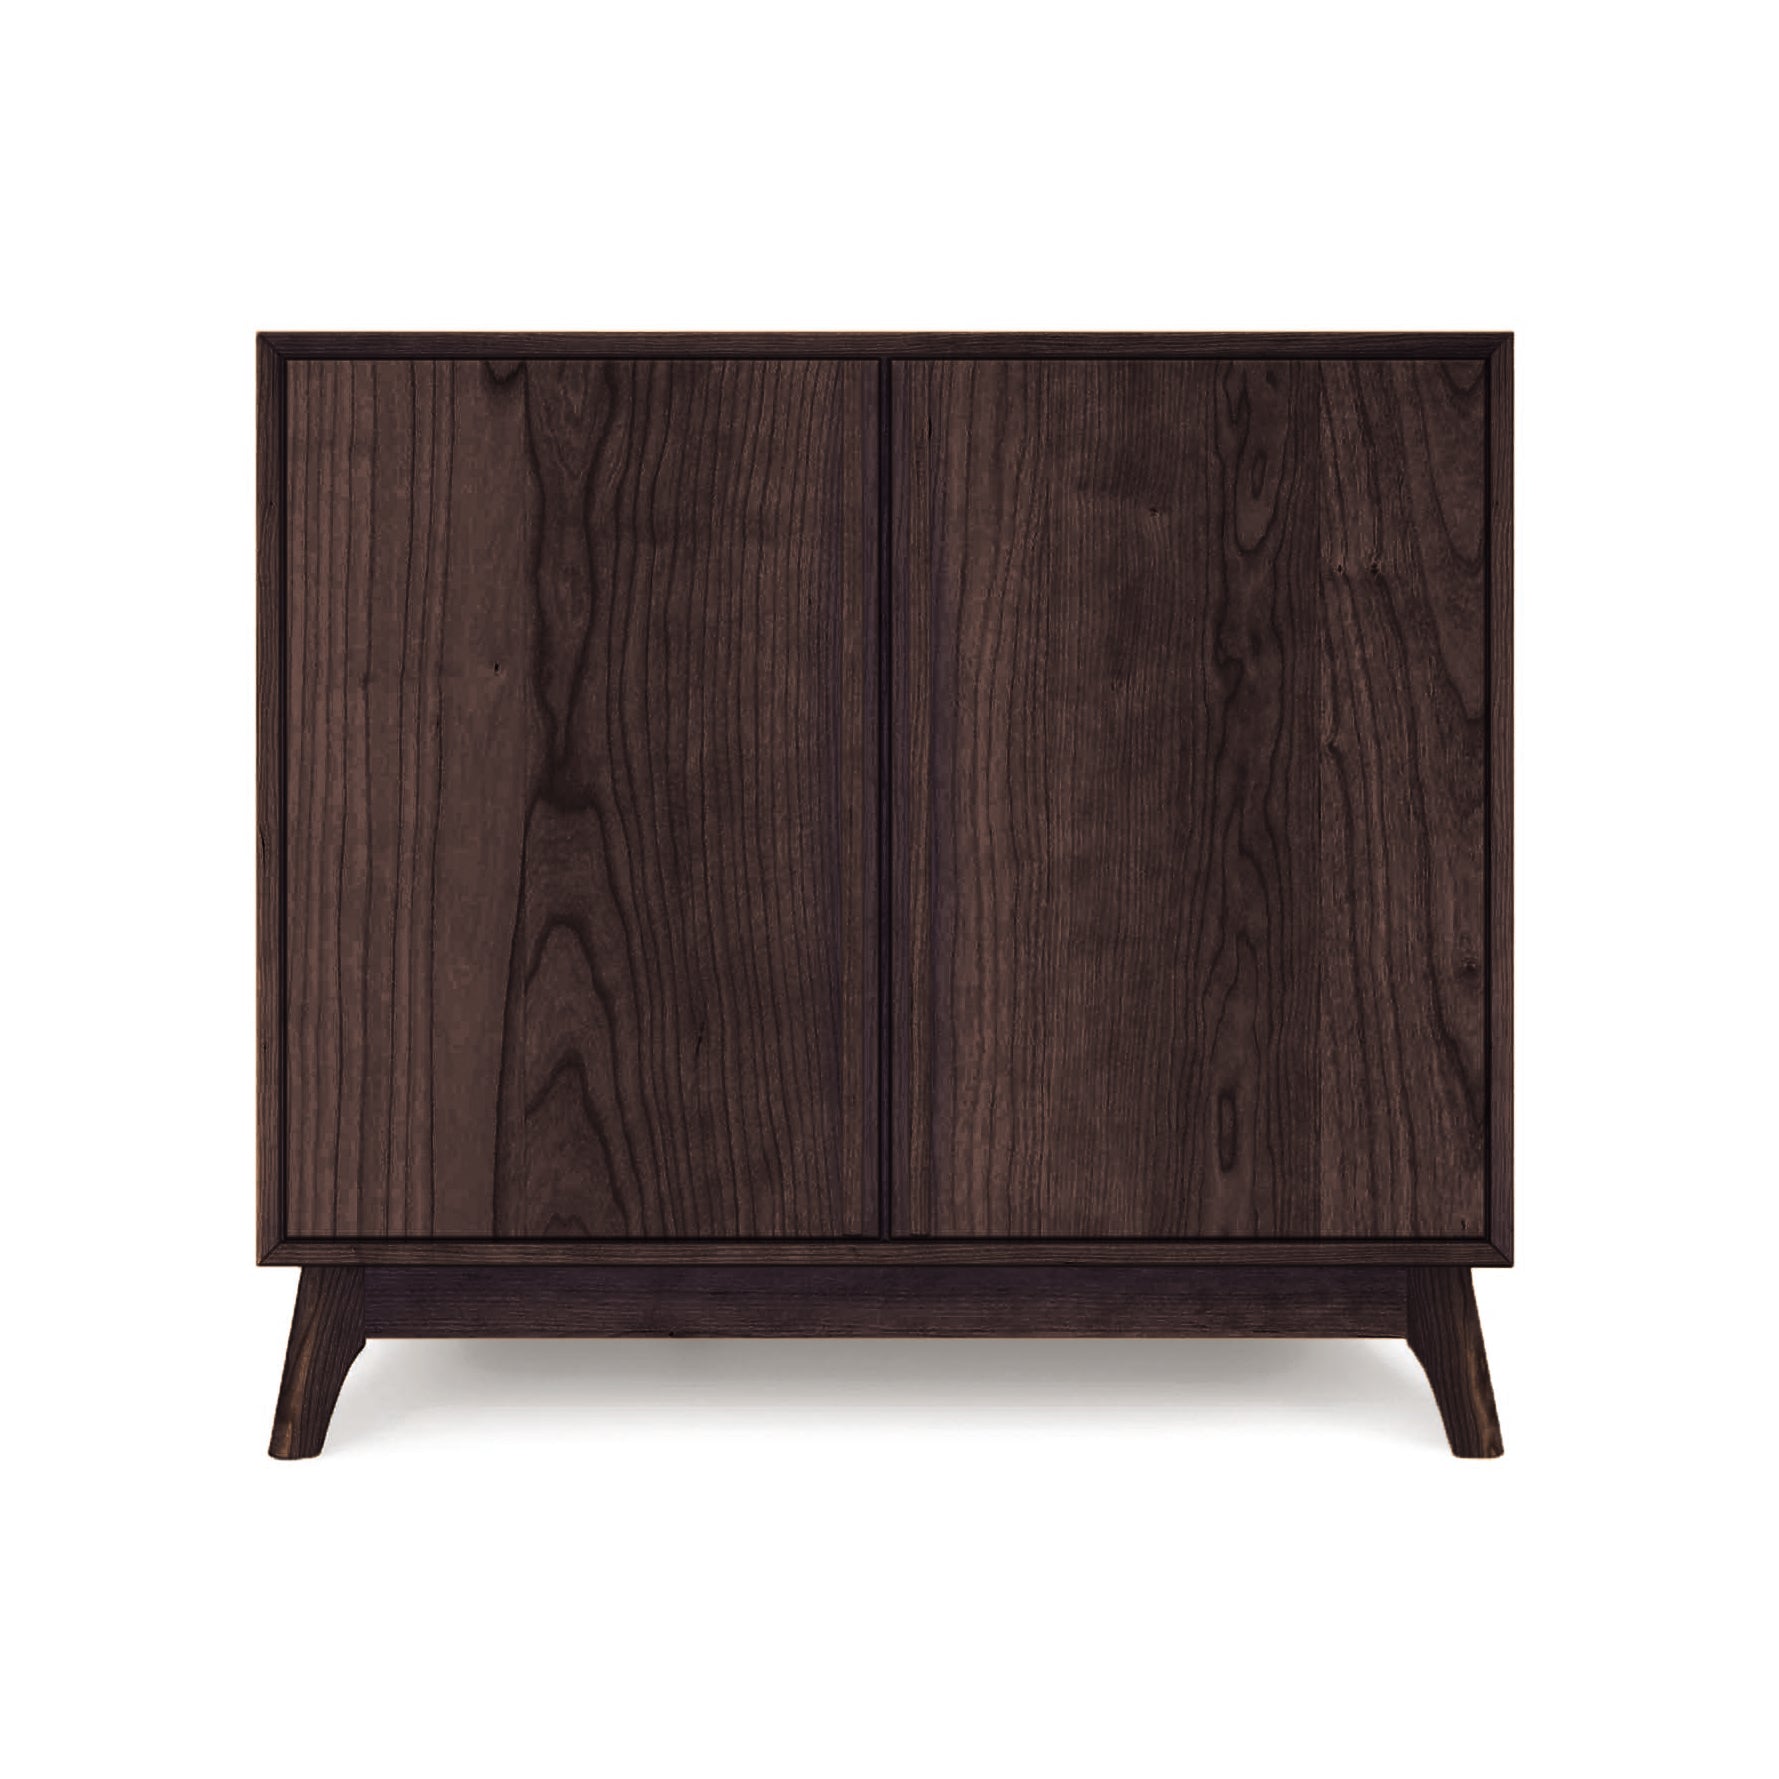 A Copeland Furniture Catalina 2-Door Buffet crafted from sustainable hardwoods, with two doors and angled legs isolated on a white background.